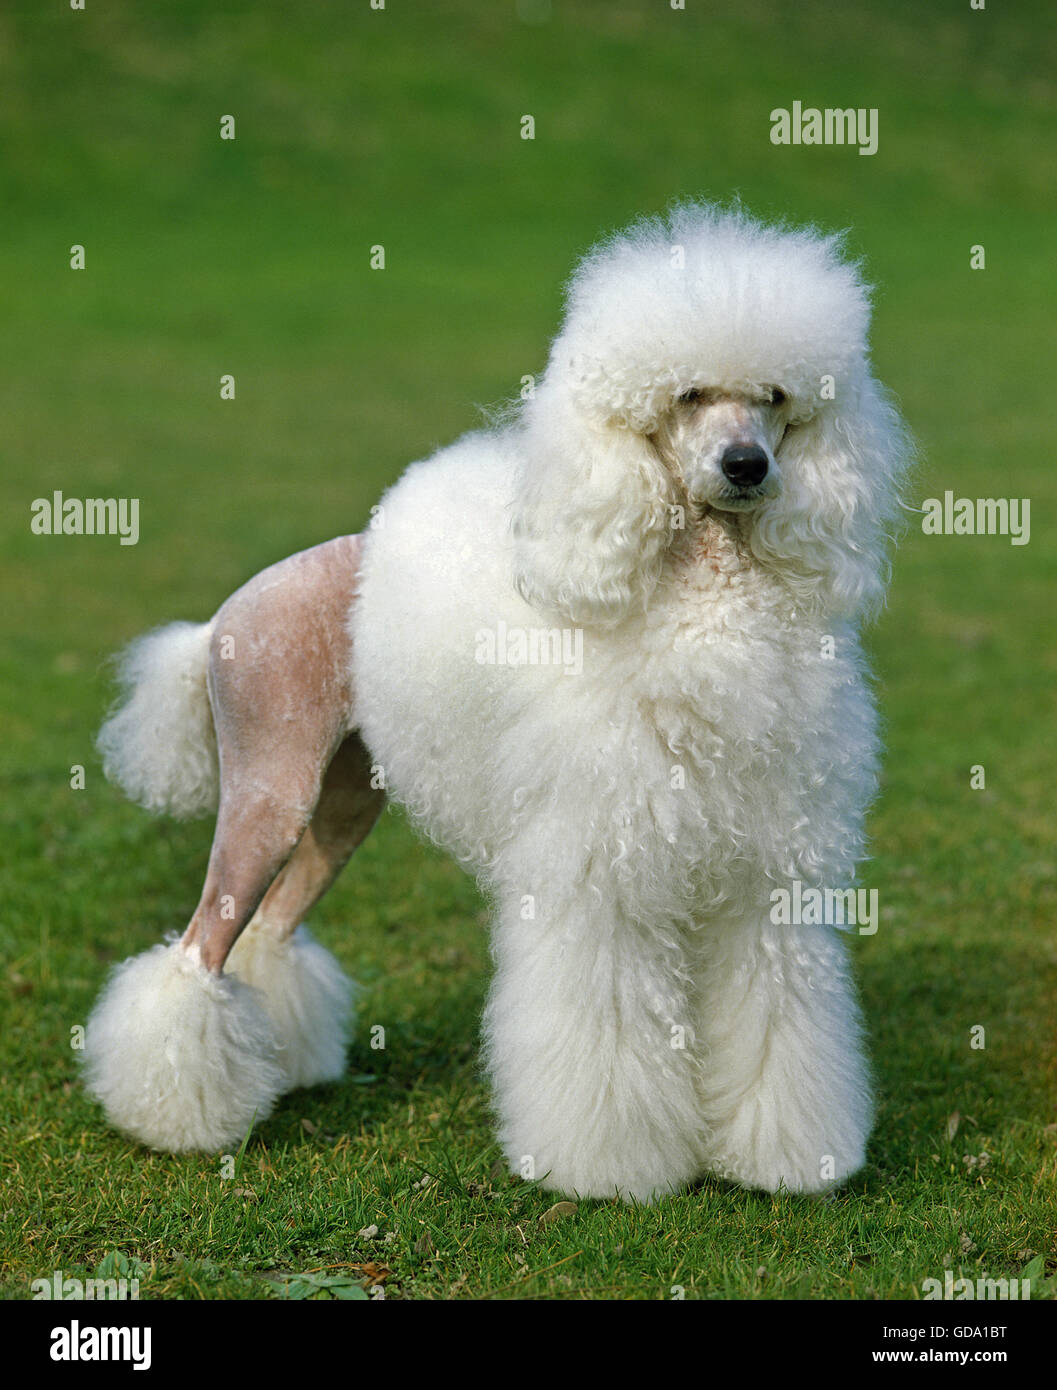 White Giant Poodle, Adult standing on Lawn Stock Photo